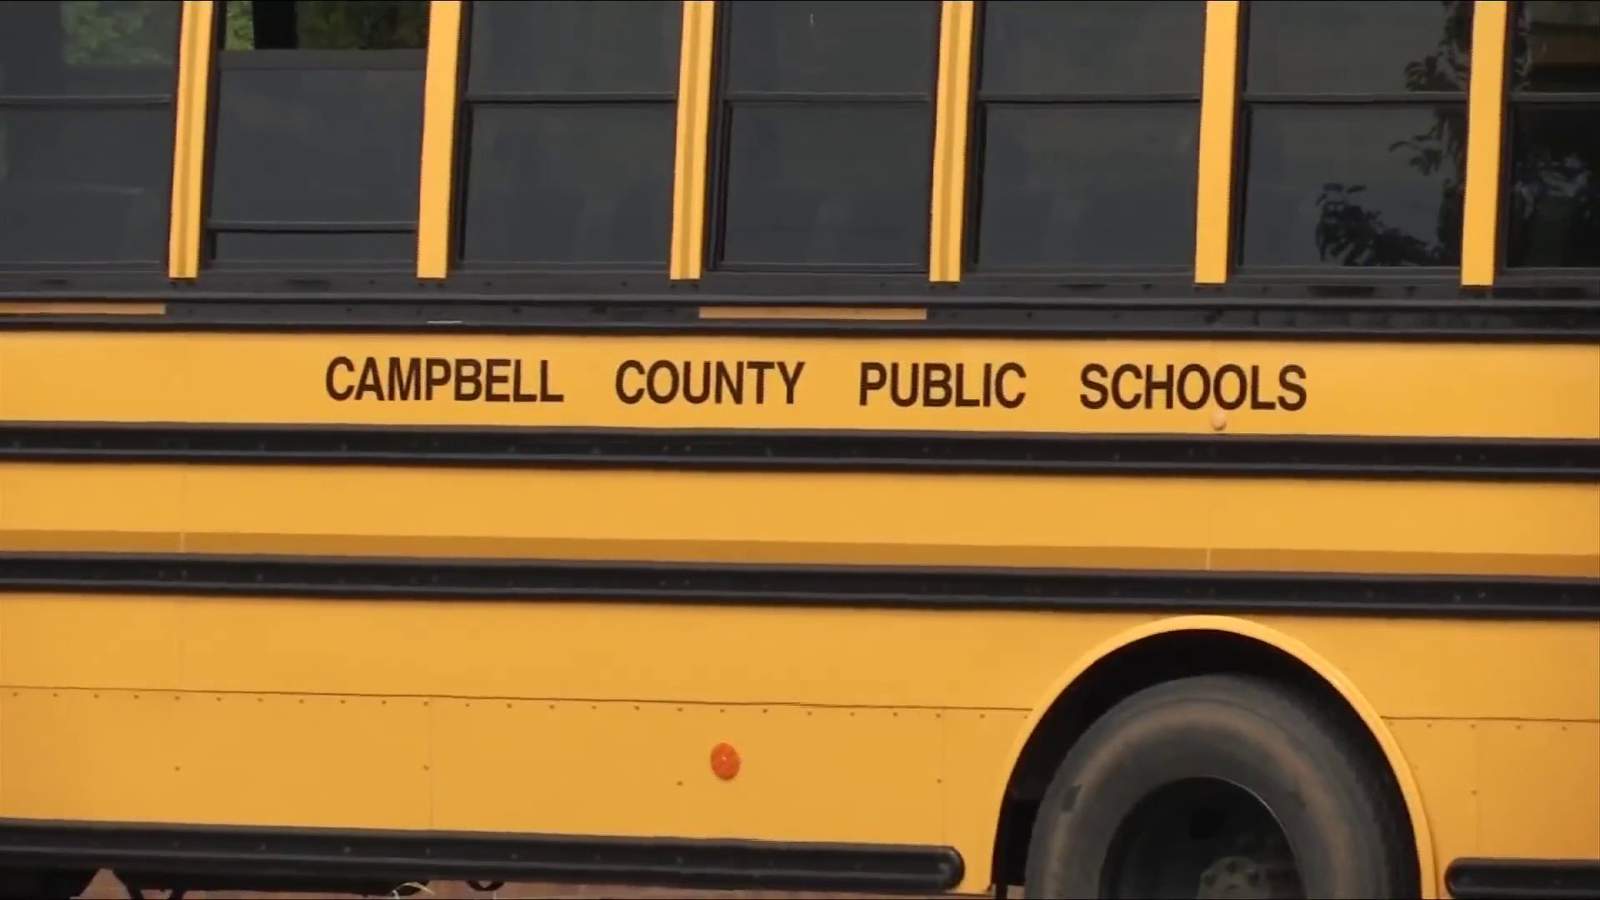 Three schools in Campbell County announced positive COVID-19 cases